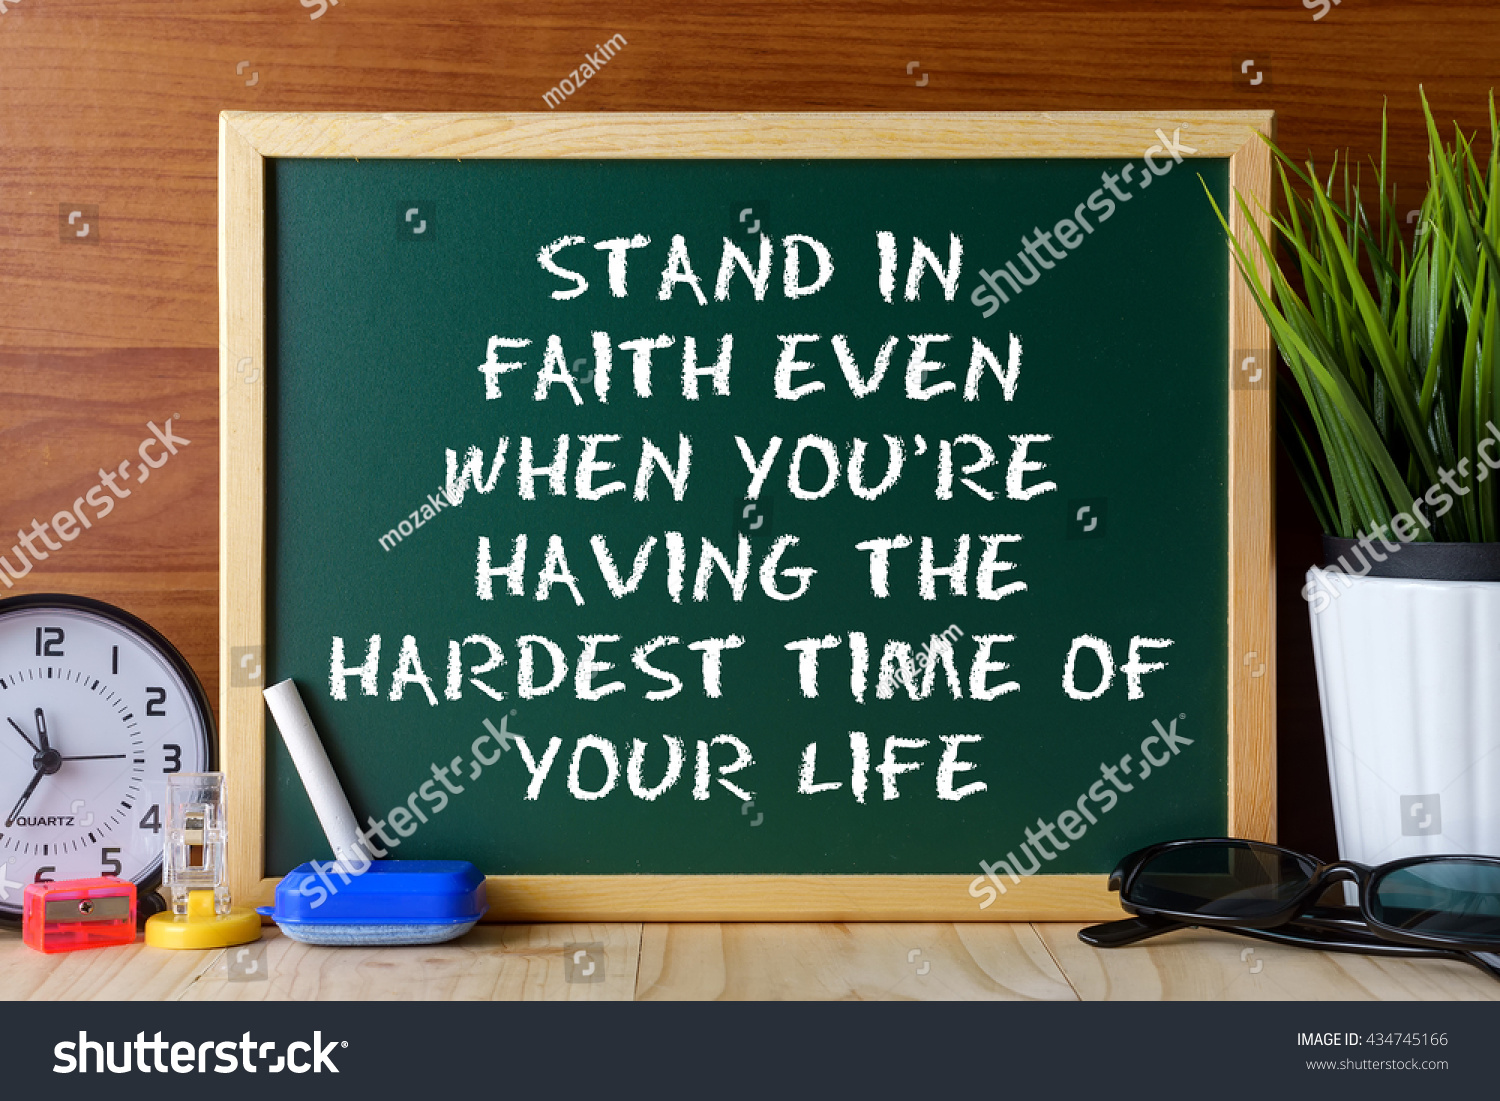 Word quote STAND IN FAITH EVEN WHEN YOU RE HAVING THE HARDEST TIME OF YOUR